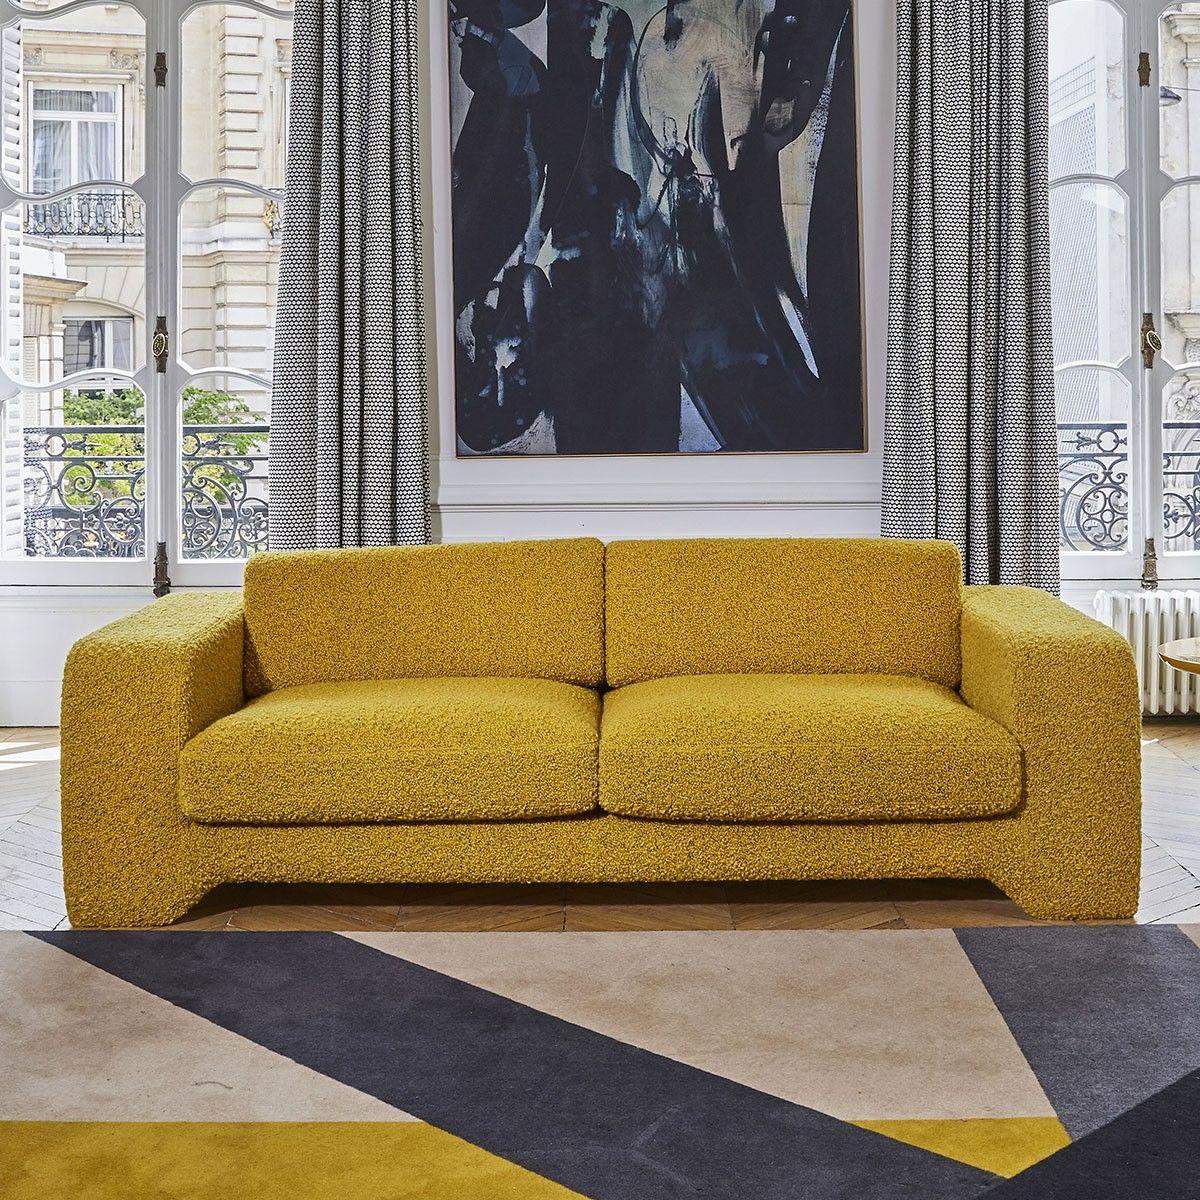 Popus Editions Giovanna 3 Seater Sofa in Navy Verone Velvet Upholstery

Giovanna is a sofa with a strong profile. A sober, plush line, with this famous detail that changes everything, so as not to forget its strength of character and this charming